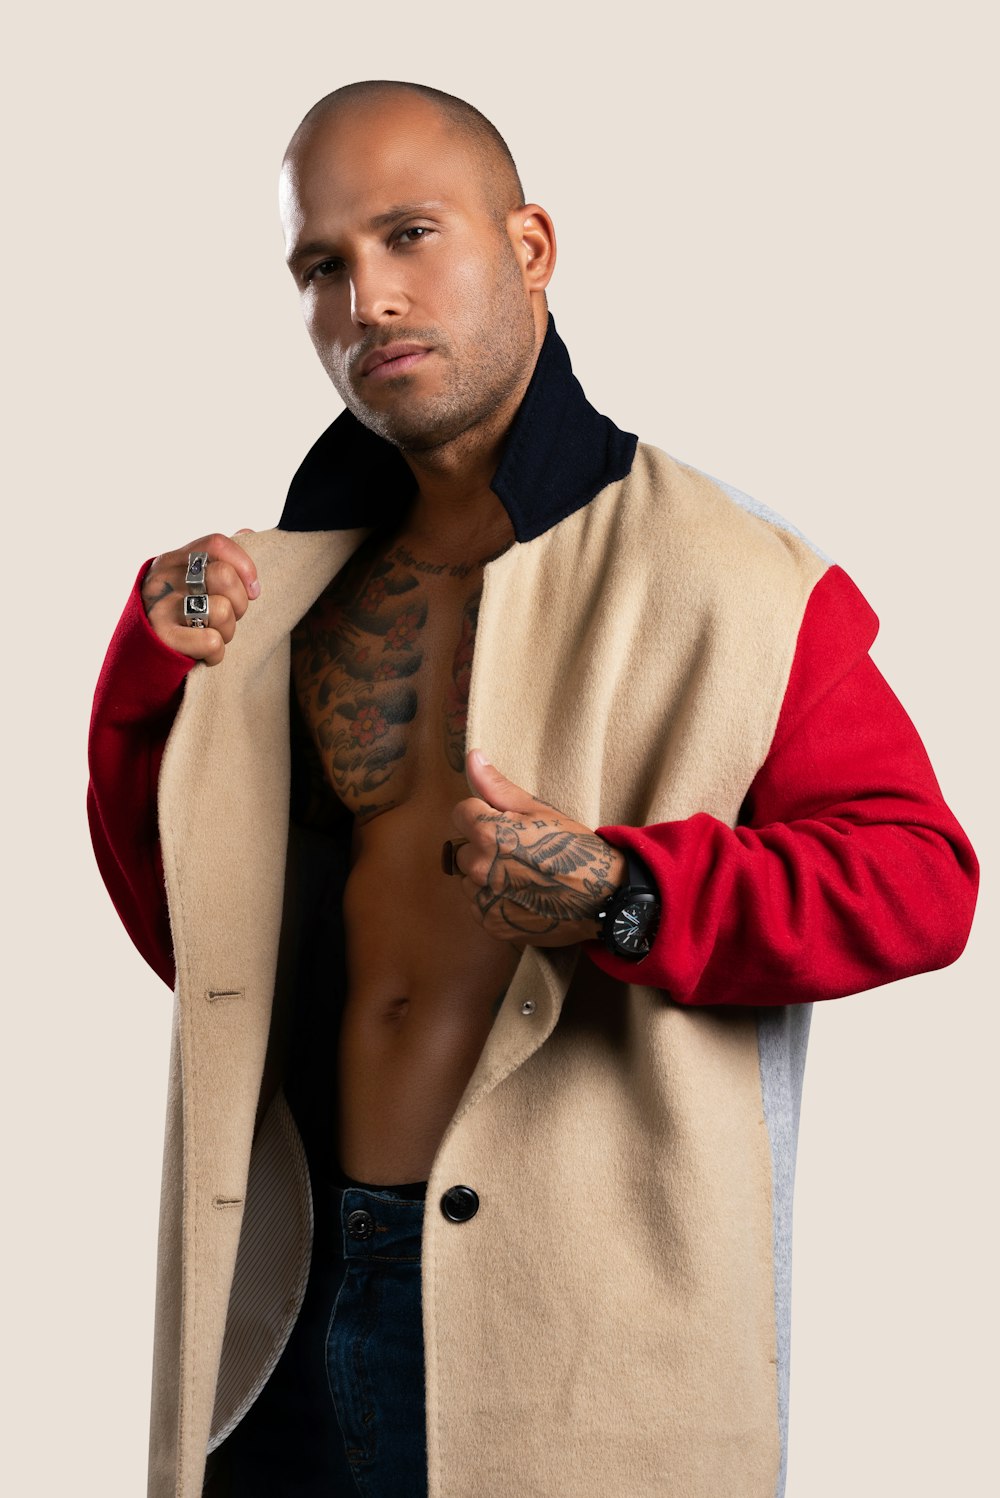 a man with a tattoo on his arm wearing a jacket